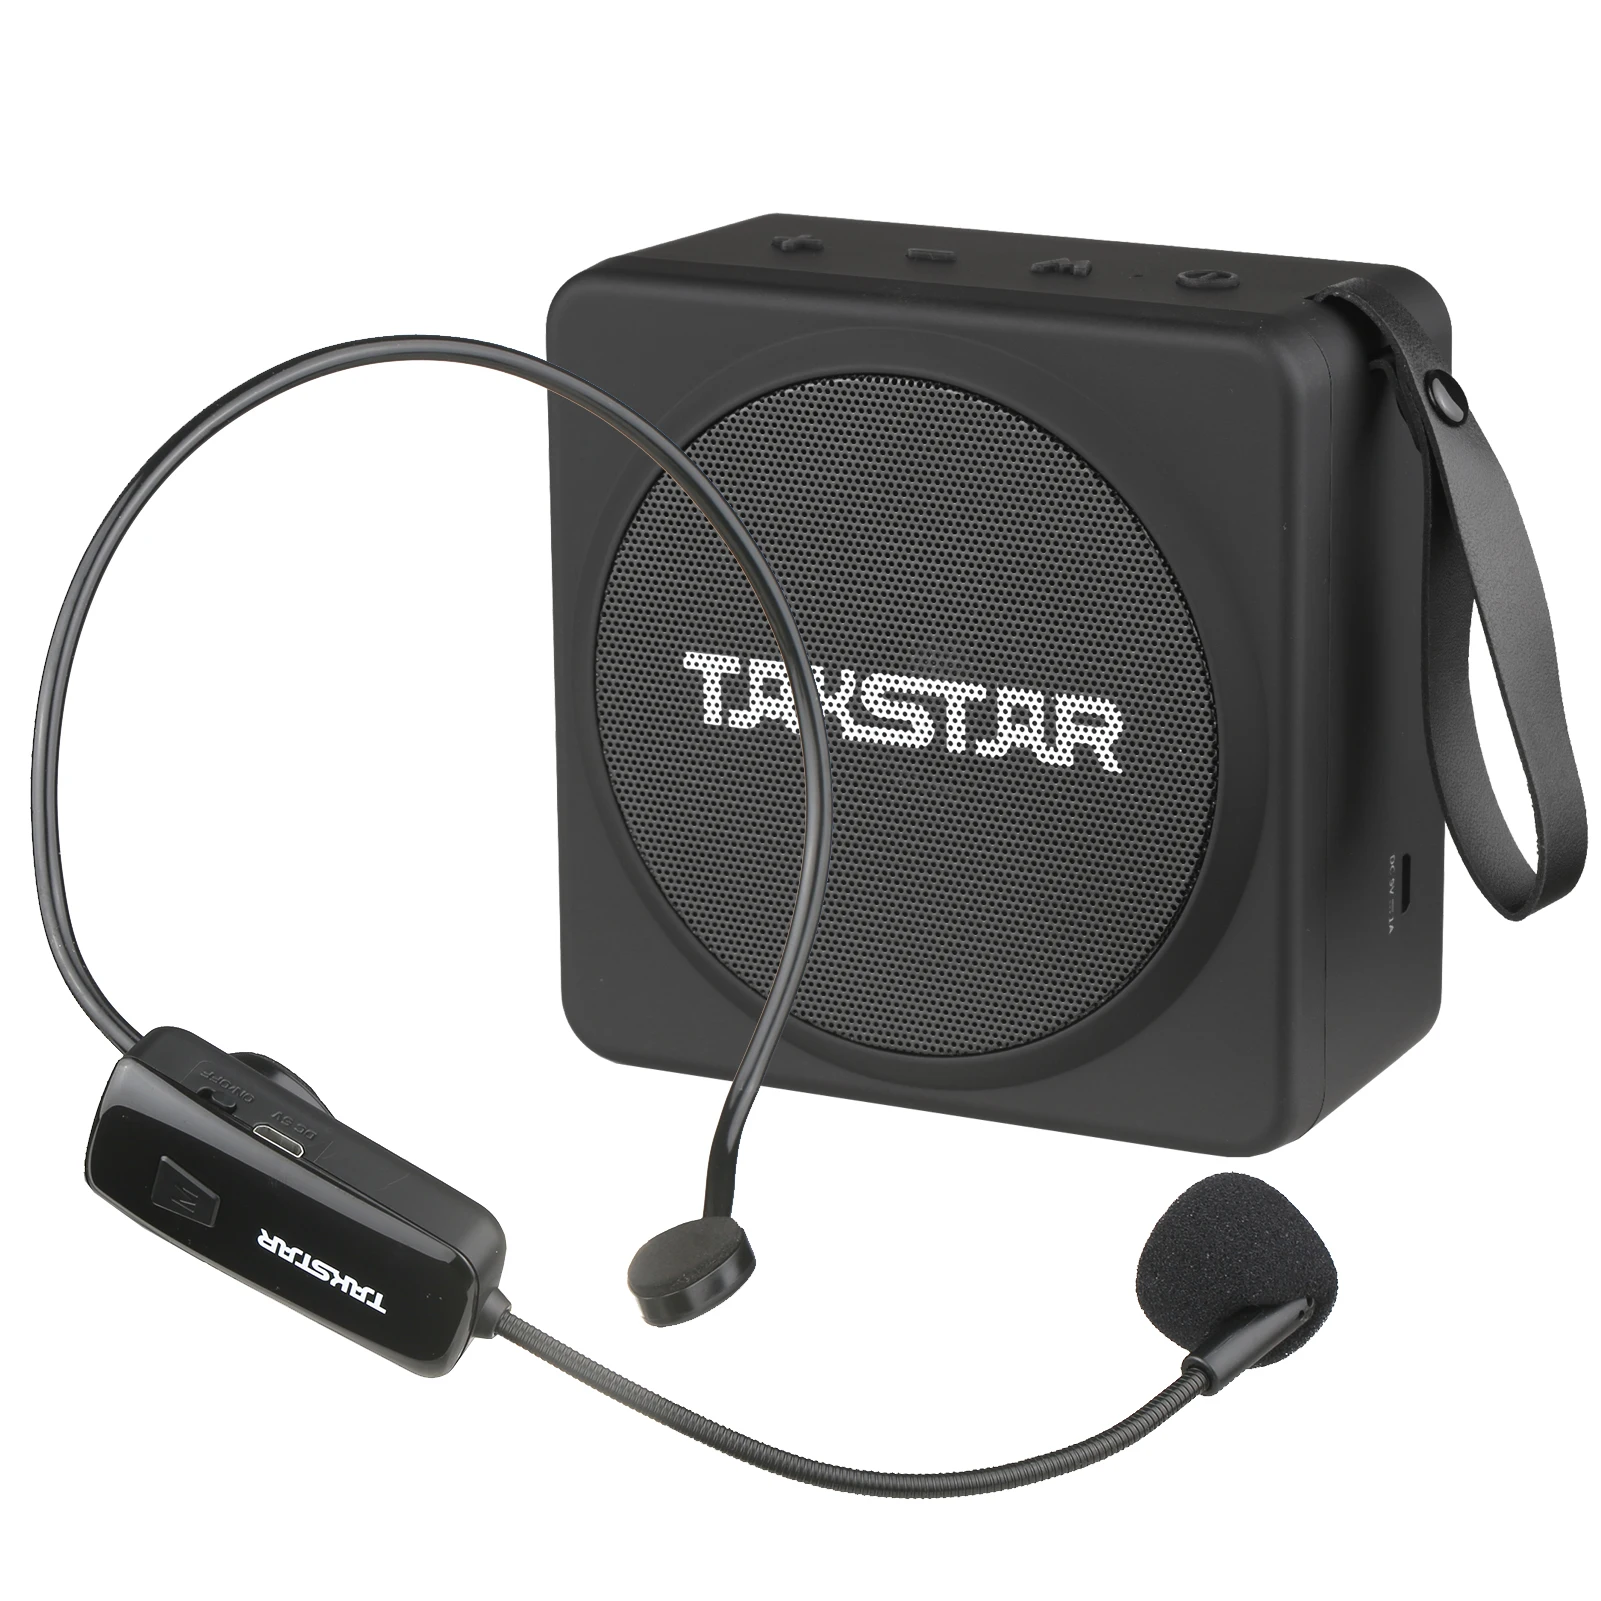 TAKSTAR Portable Wireless Voice Amplifier Rechargeable Audio Speaker with Wireless Head-Mounted Microphone for Teachers